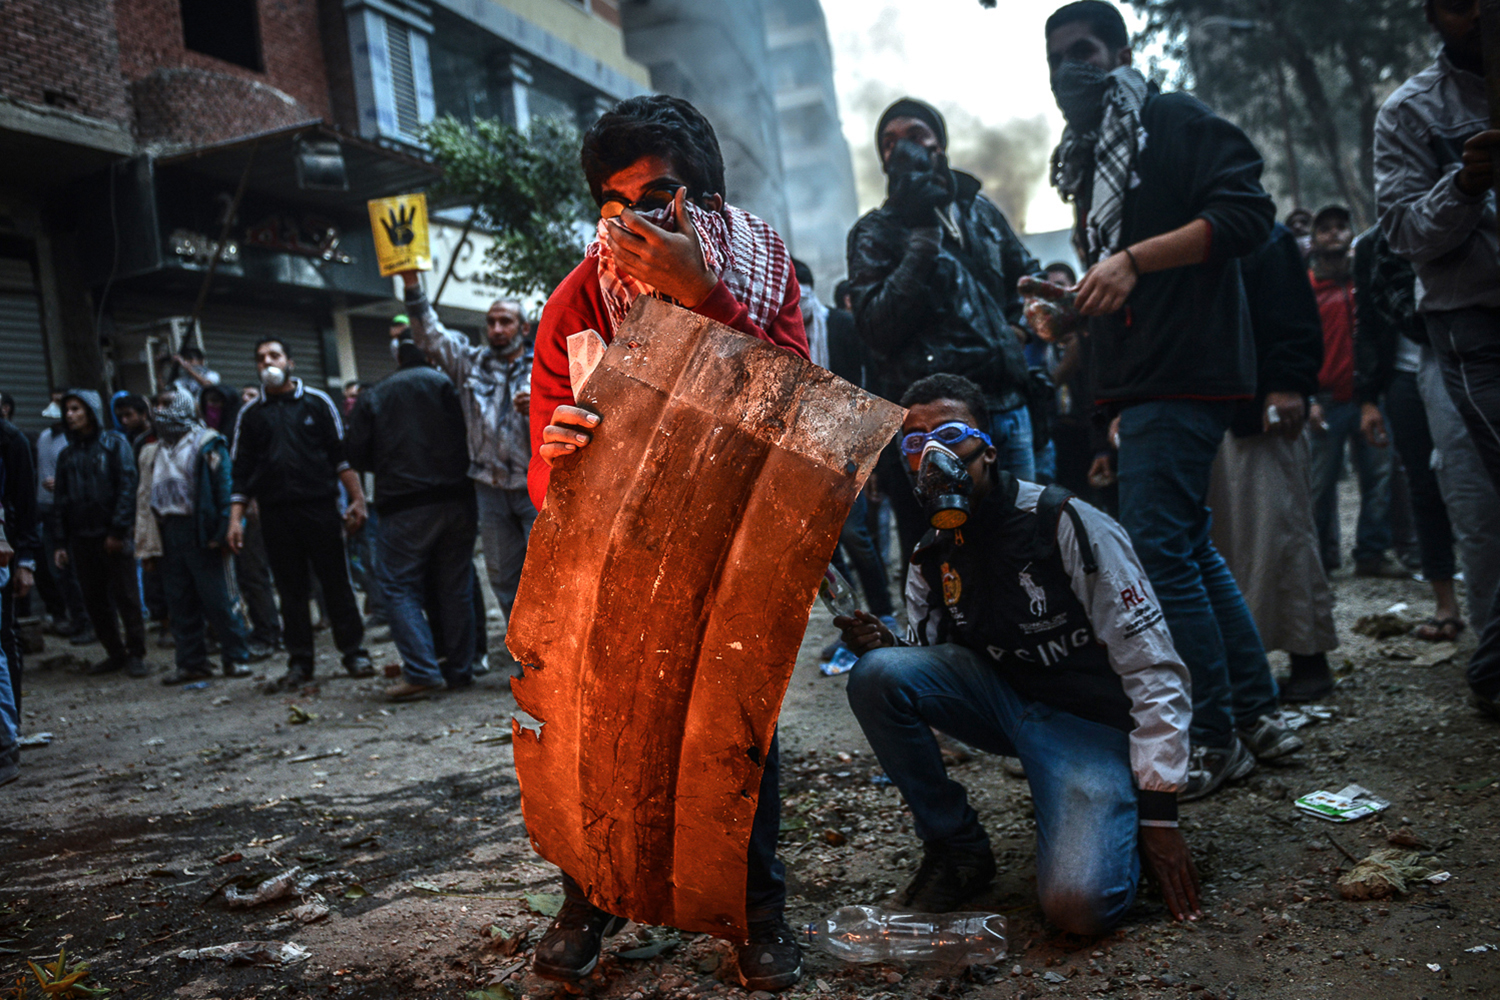 Dec. 27, 2013. Egyptian pro-democracy protestors and police clash during a demonstration against Muslim Brotherhood's 'terrorist label' in the Alf Maskan district of Cairo, Egypt.